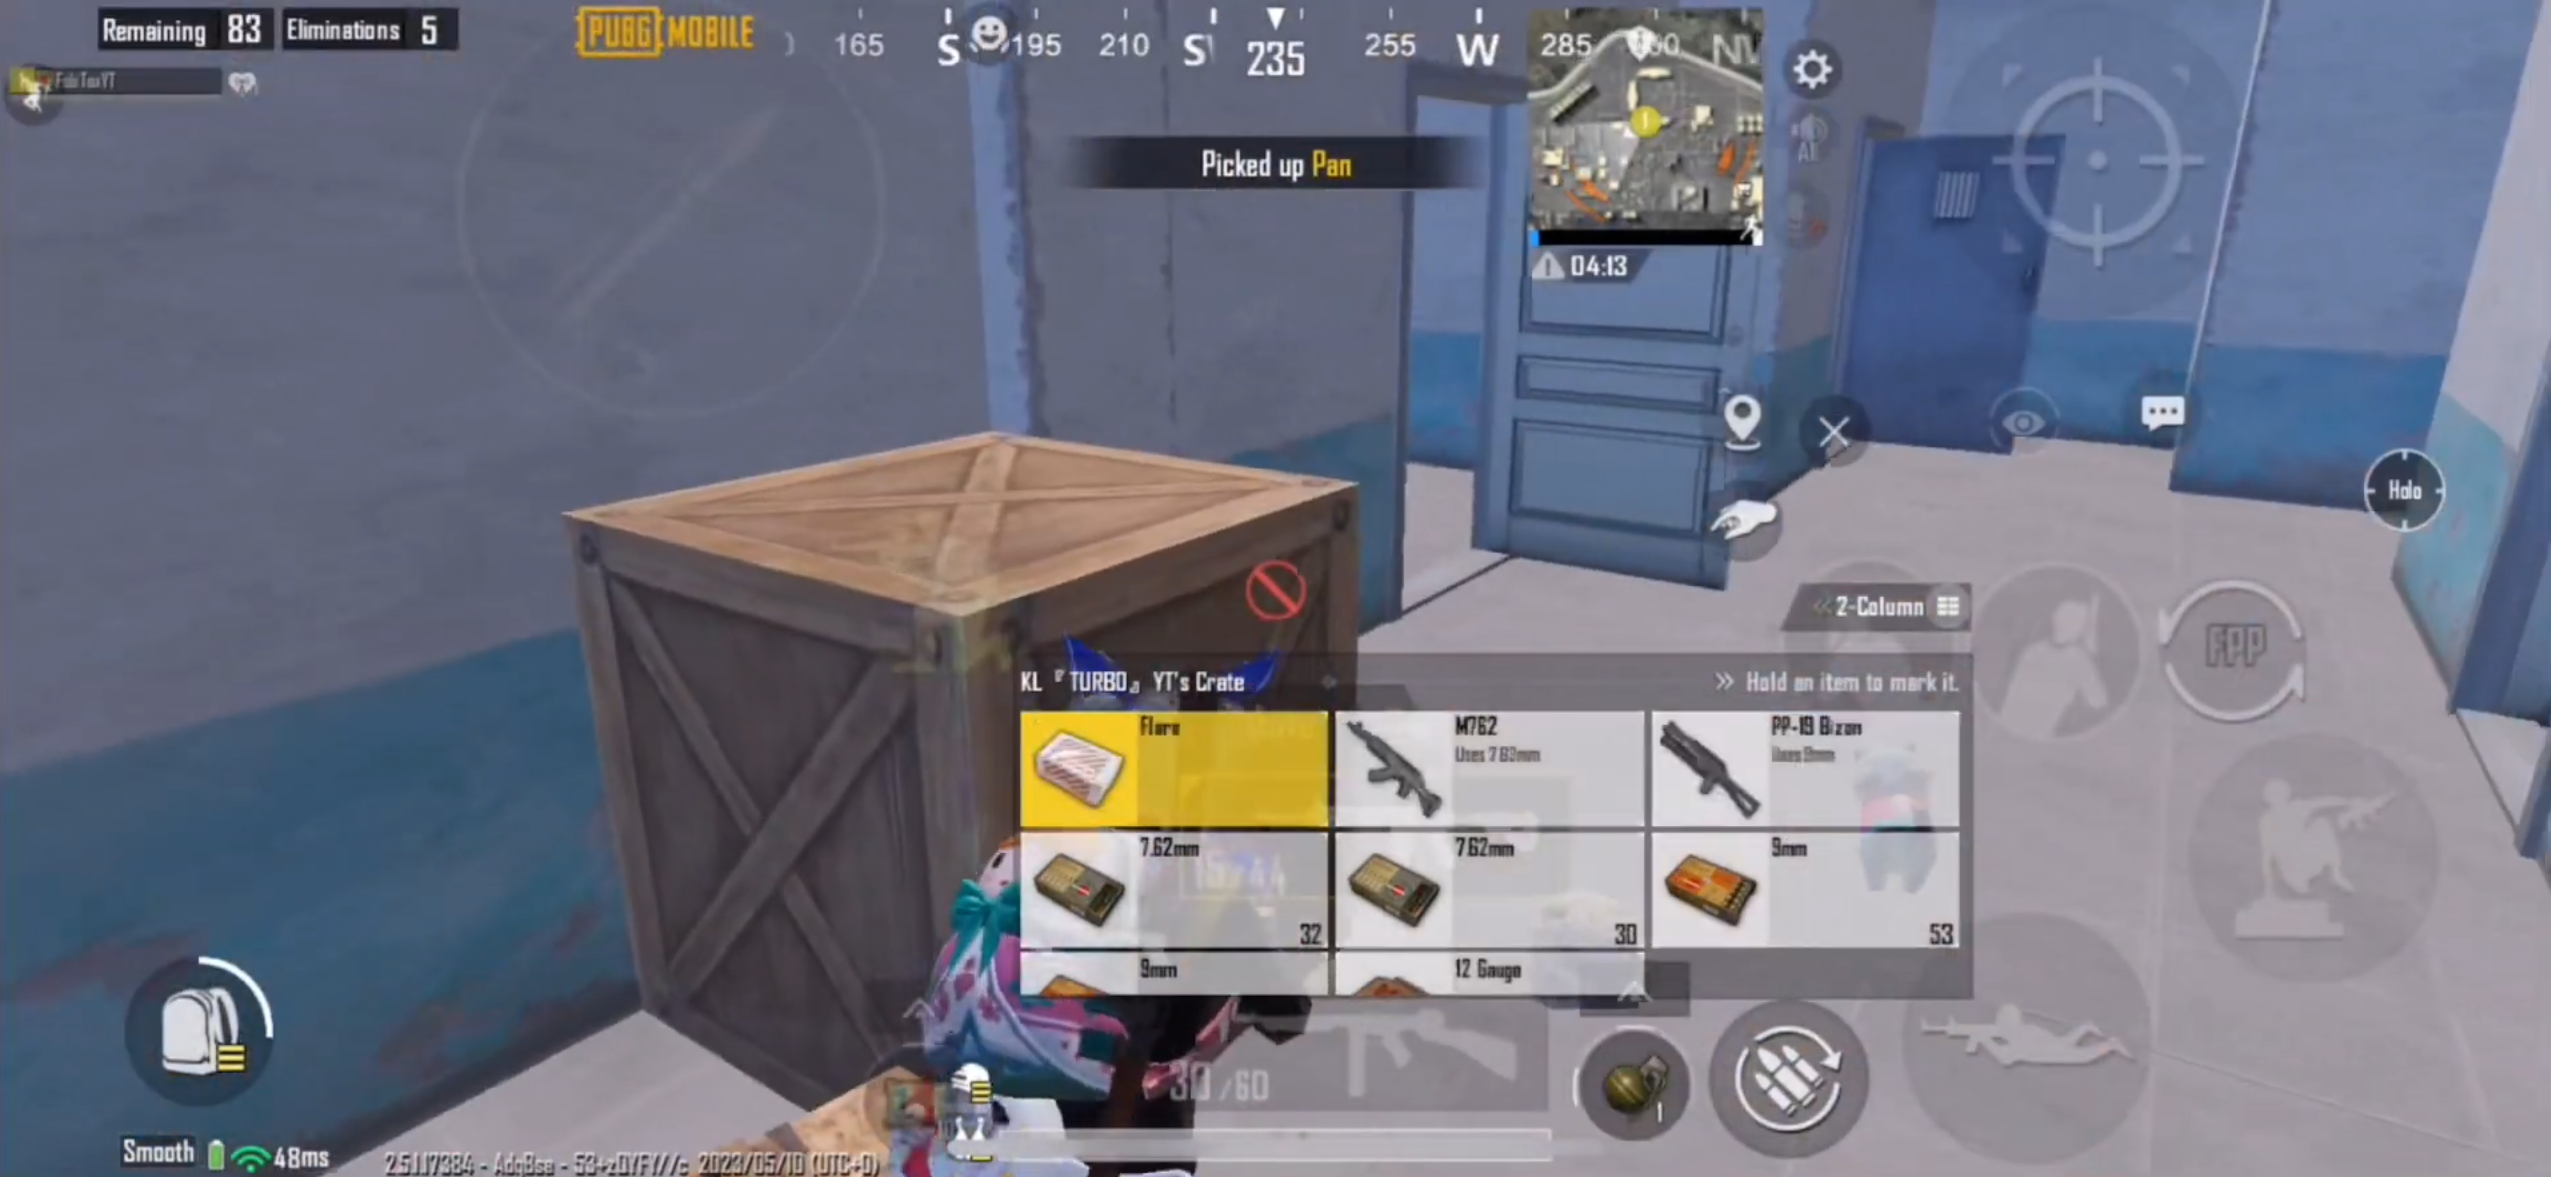 PUBG Mobile is an intense action-packed game and memes